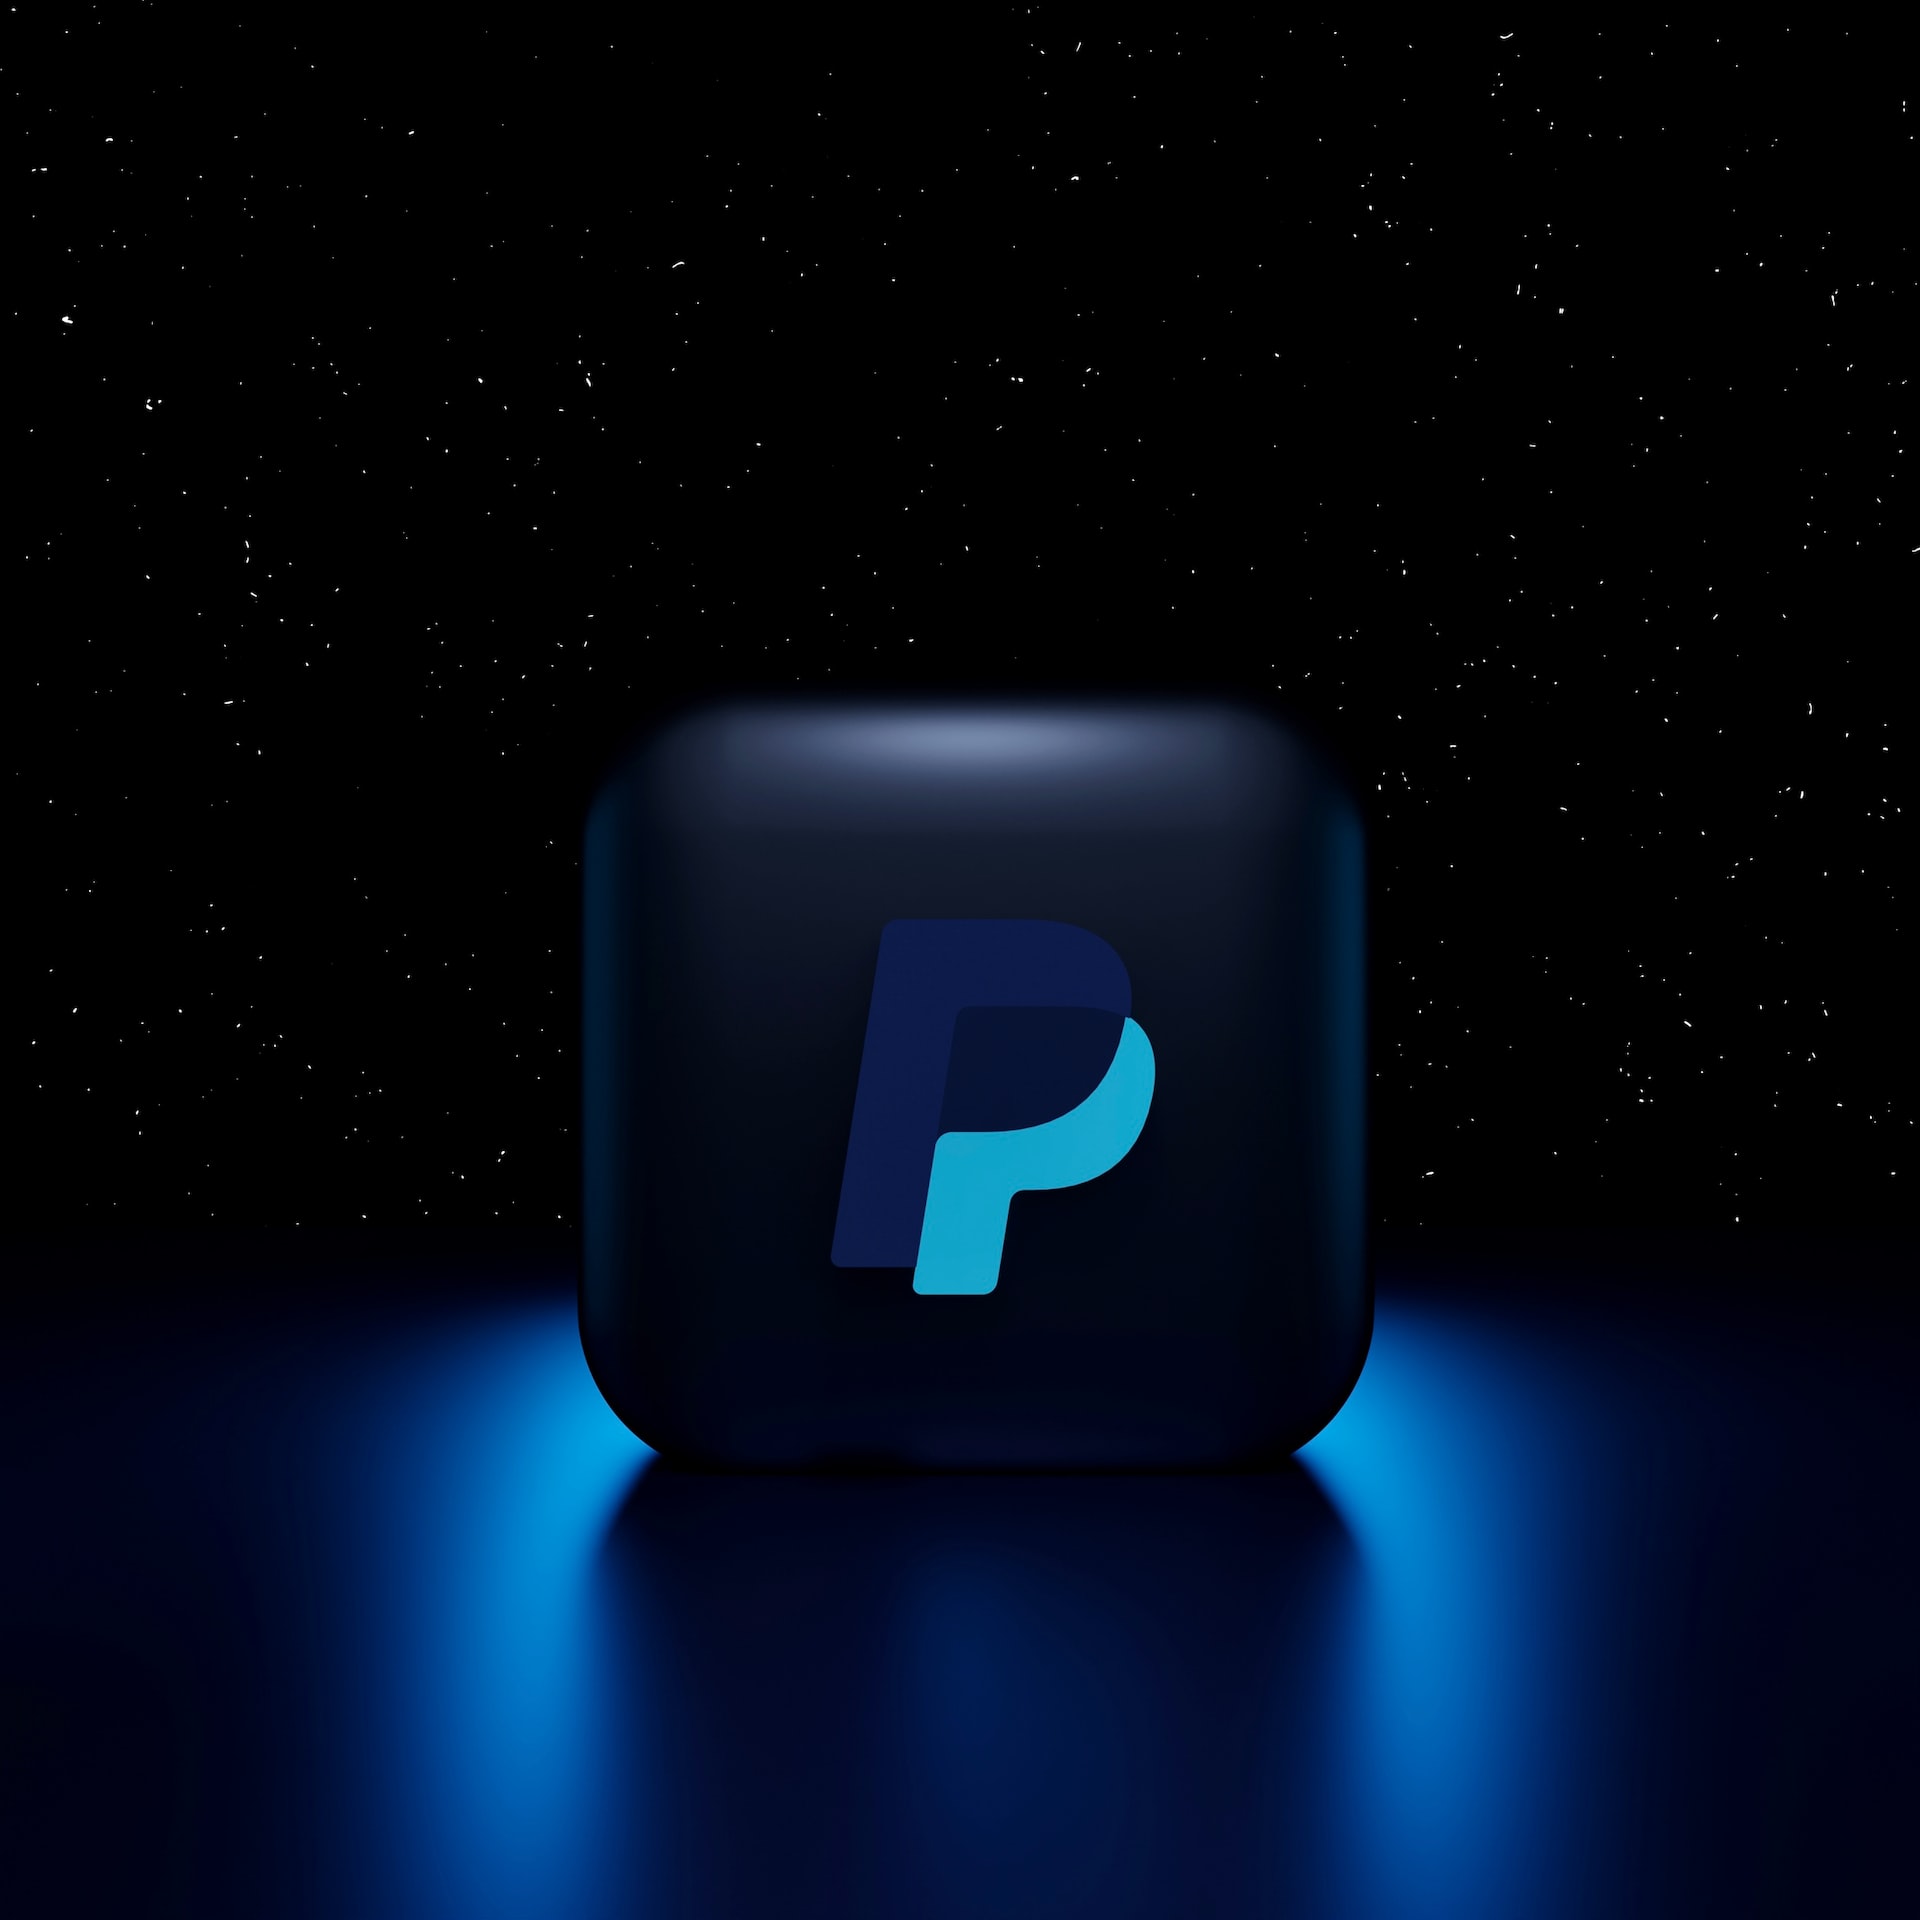 PayPal Introduces More Secure Payments with Passkeys